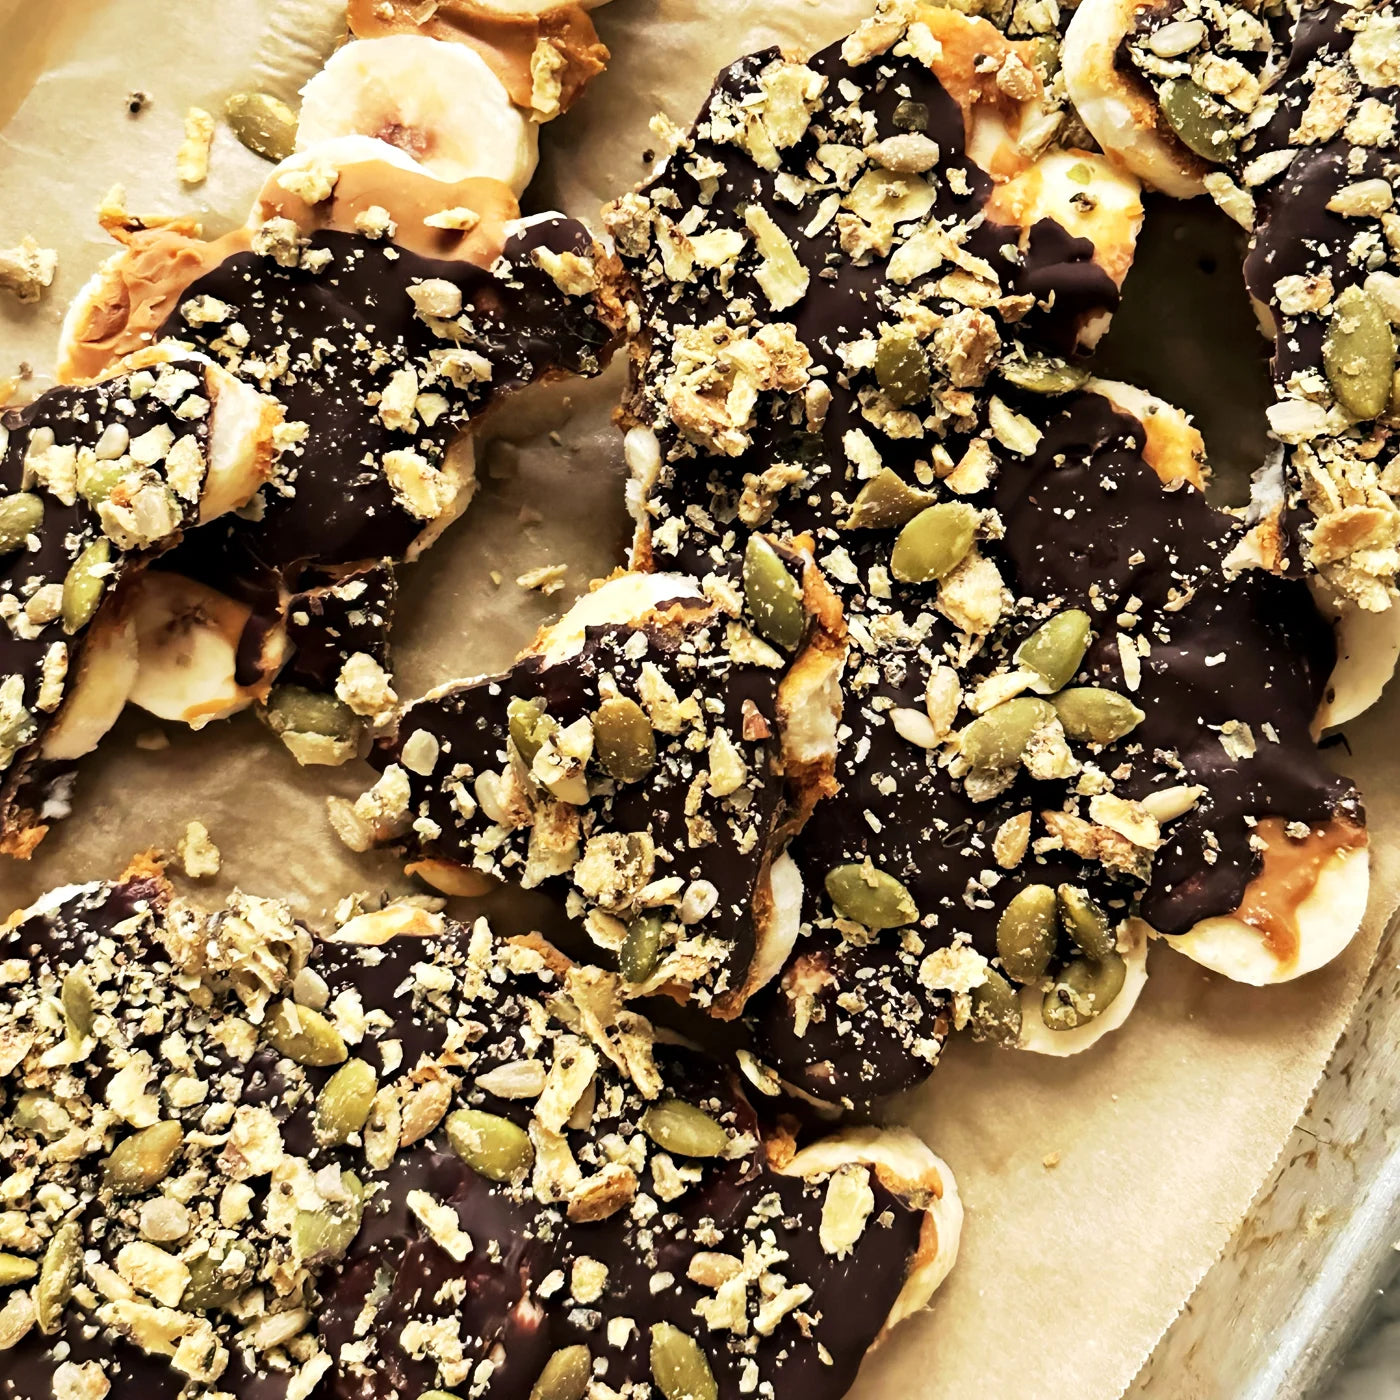 Frozen banana bark with chocolate, peanut butter and Struesli Savory + Seed sprinkled atop